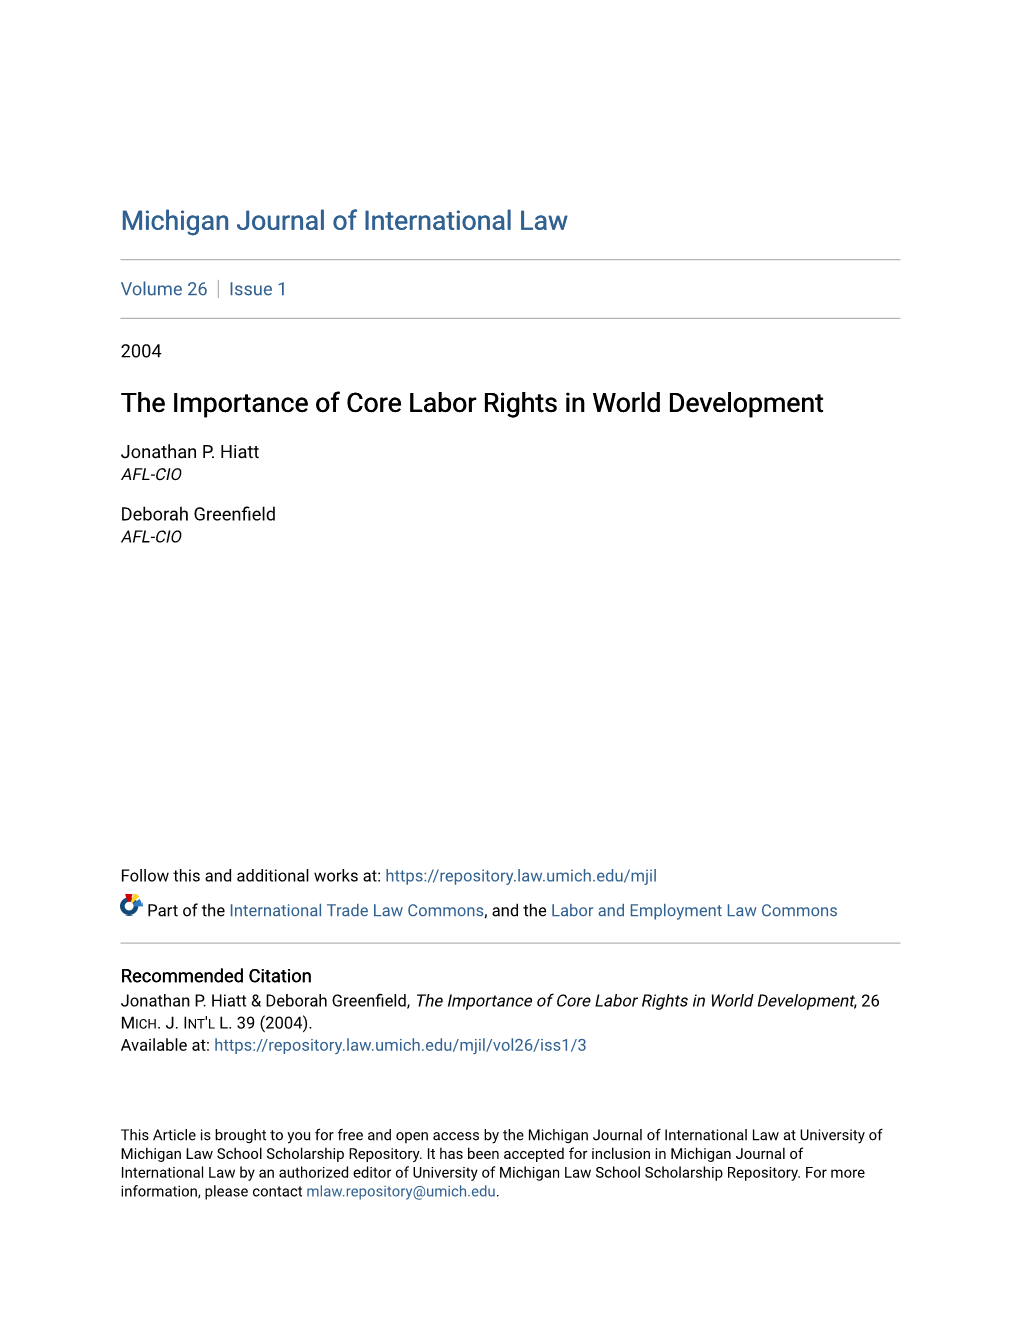 The Importance of Core Labor Rights in World Development